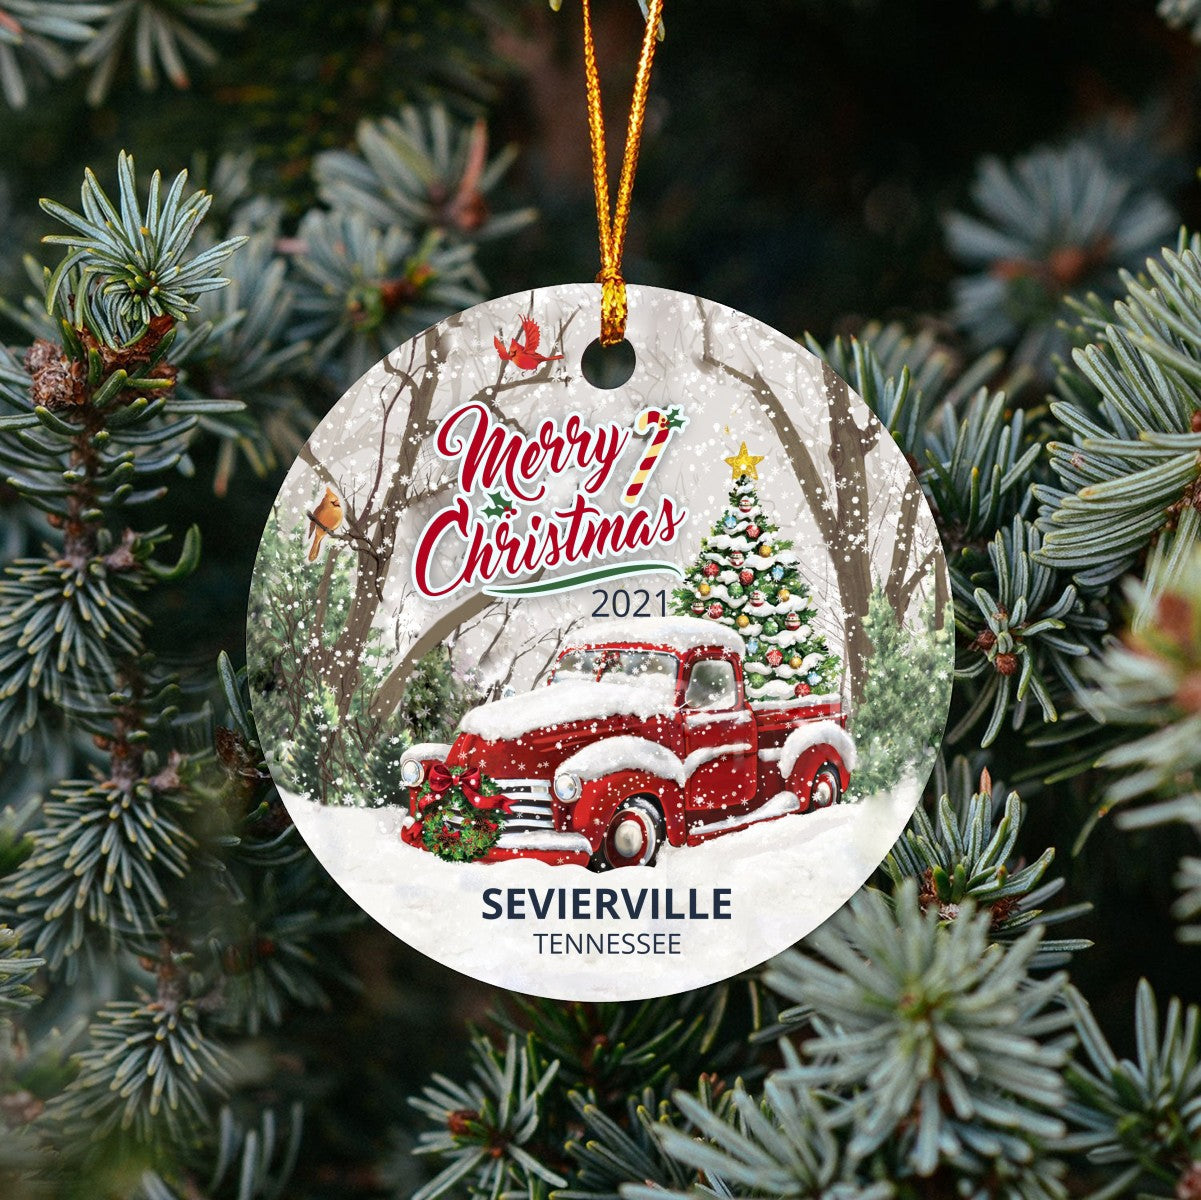 Christmas Tree Ornaments Sevierville - Ornament Customize With Name City And State Sevierville Tennessee TN - Red Truck Xmas Ornaments 3'' Plastic Gift For Family, Friend And Housewarming